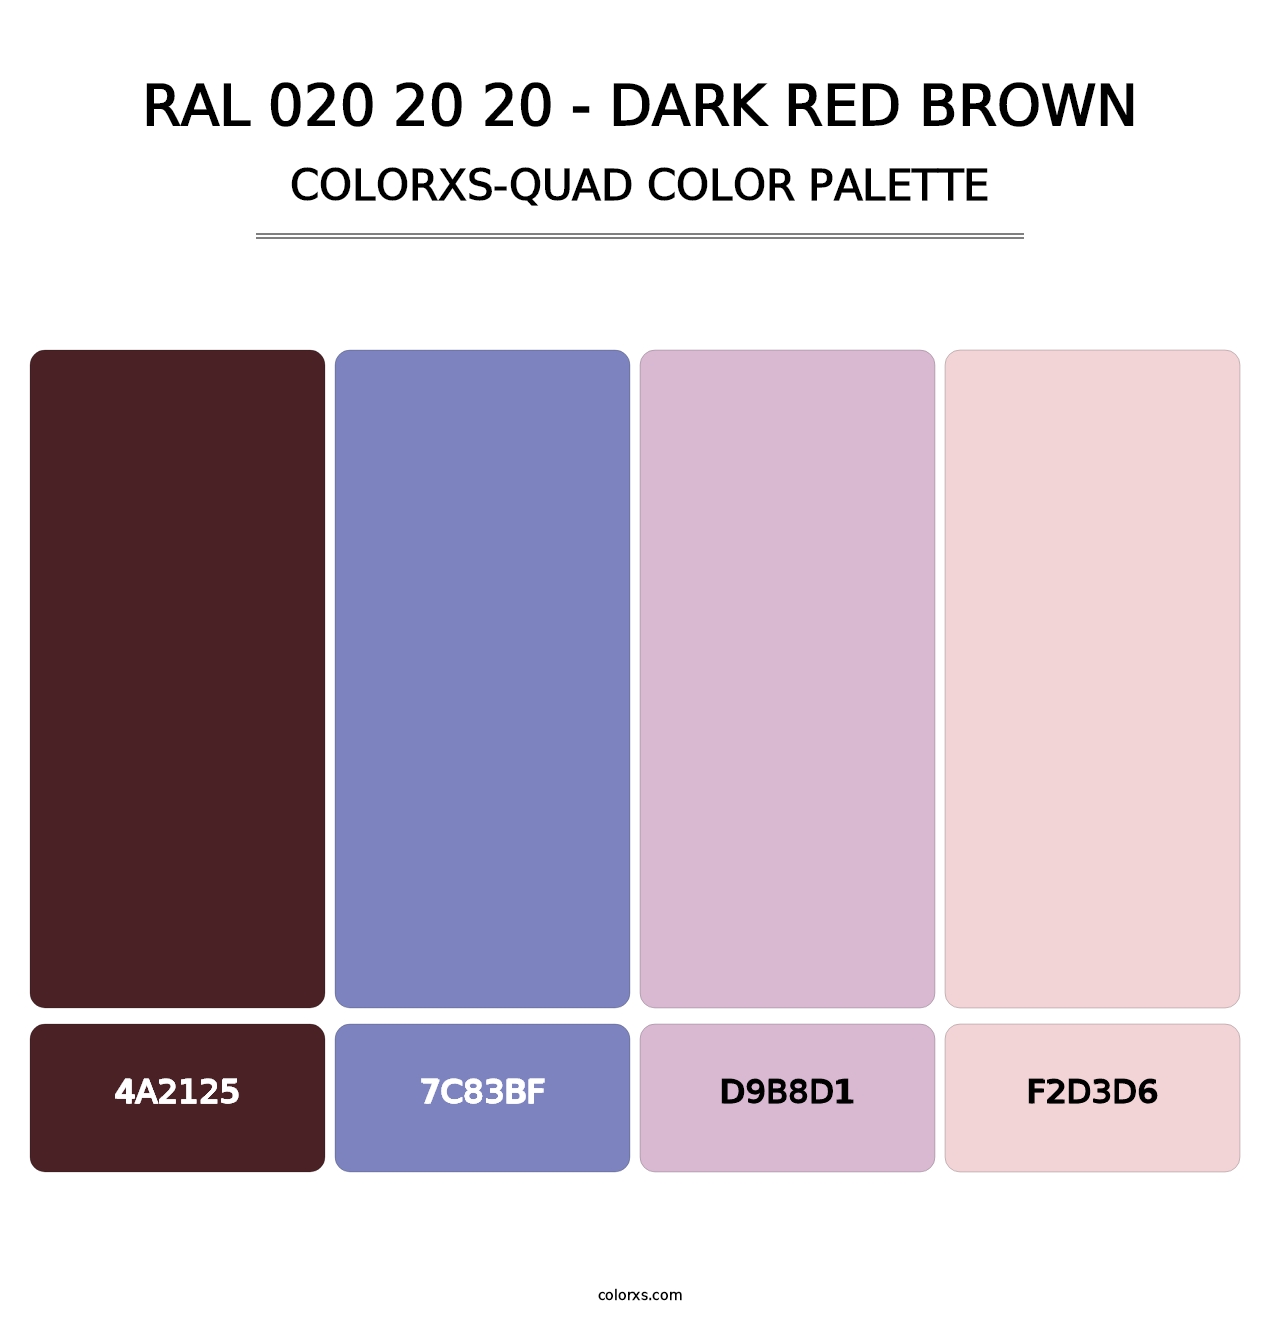 RAL 020 20 20 - Dark Red Brown - Colorxs Quad Palette